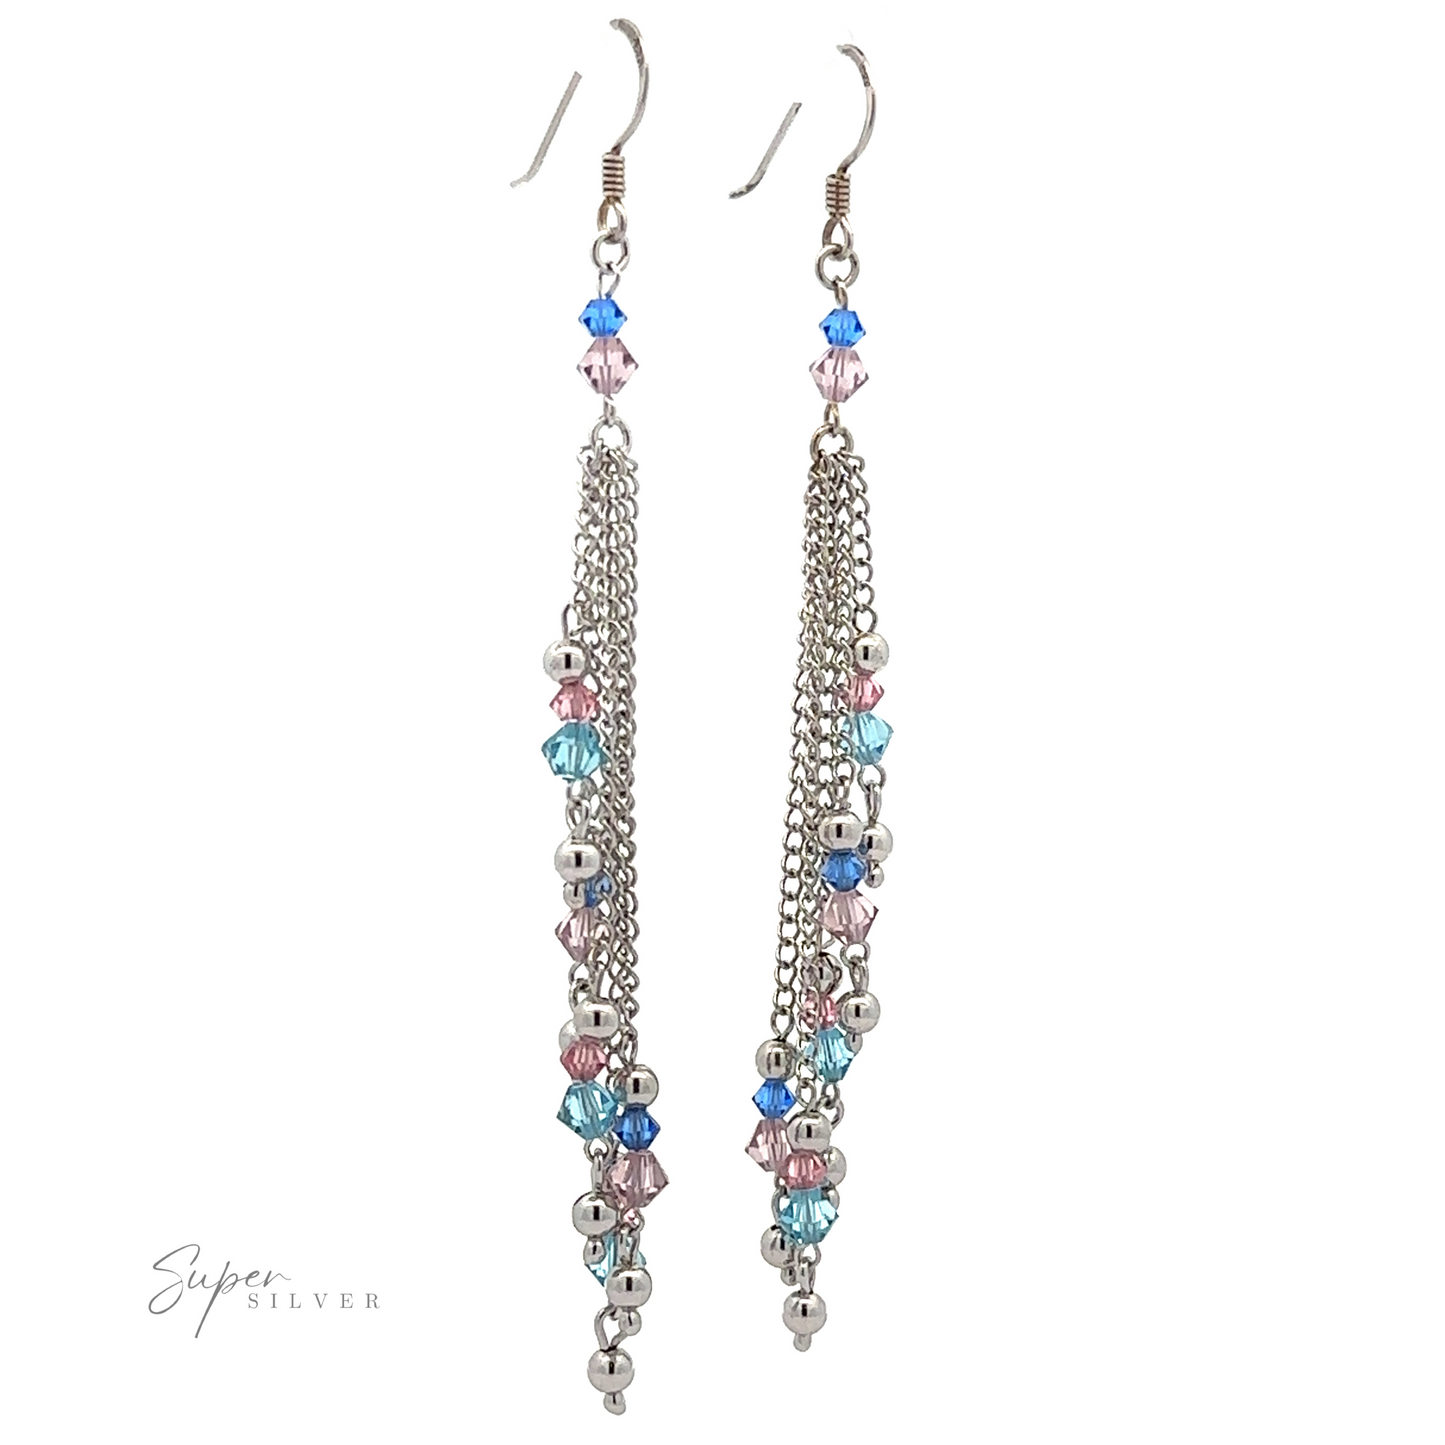 
                  
                    Layered Earrings with Multicolored Beads: Elegant long dangle earrings with rhodium-plated sterling silver chains and blue, pink, and clear multicolored beads, arranged in a cascading pattern.
                  
                